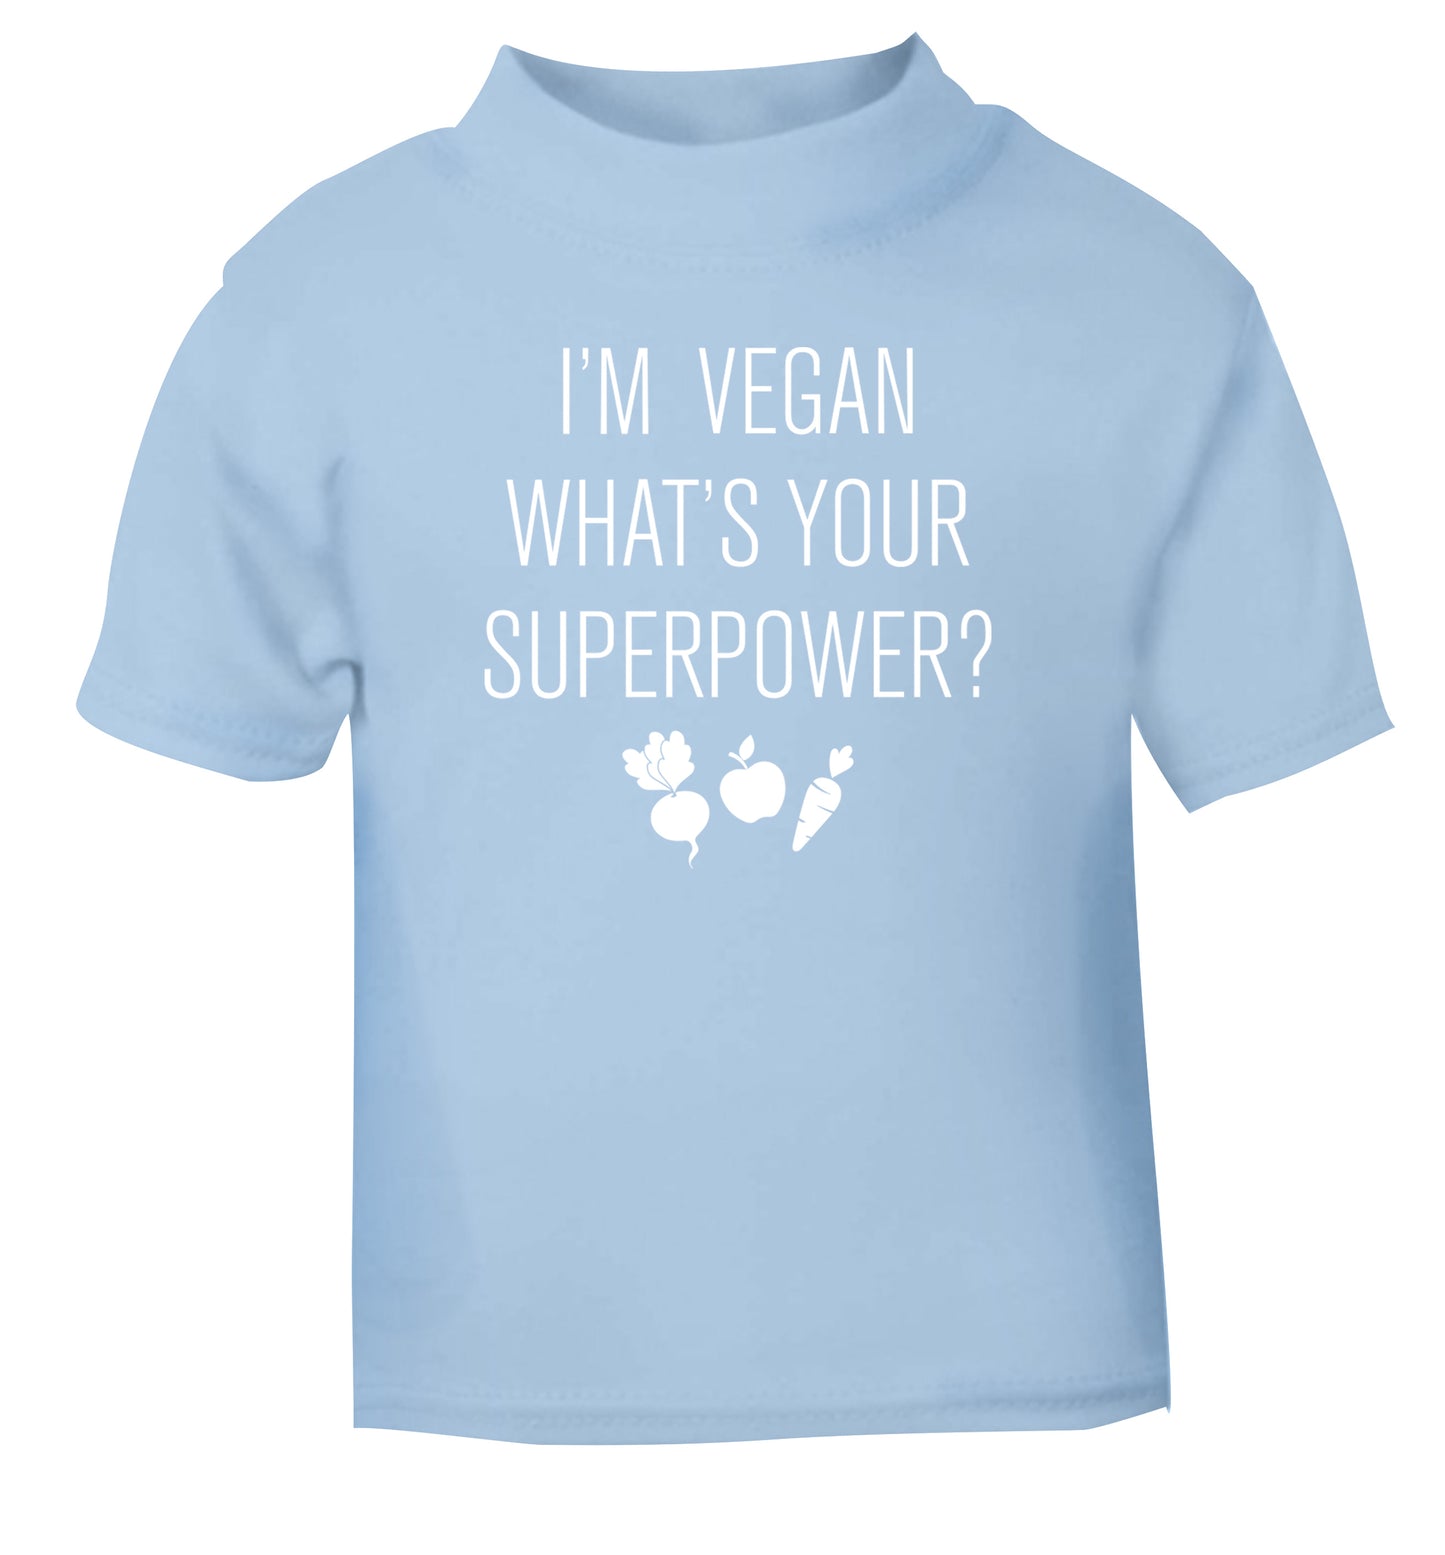 I'm Vegan What's Your Superpower? light blue Baby Toddler Tshirt 2 Years